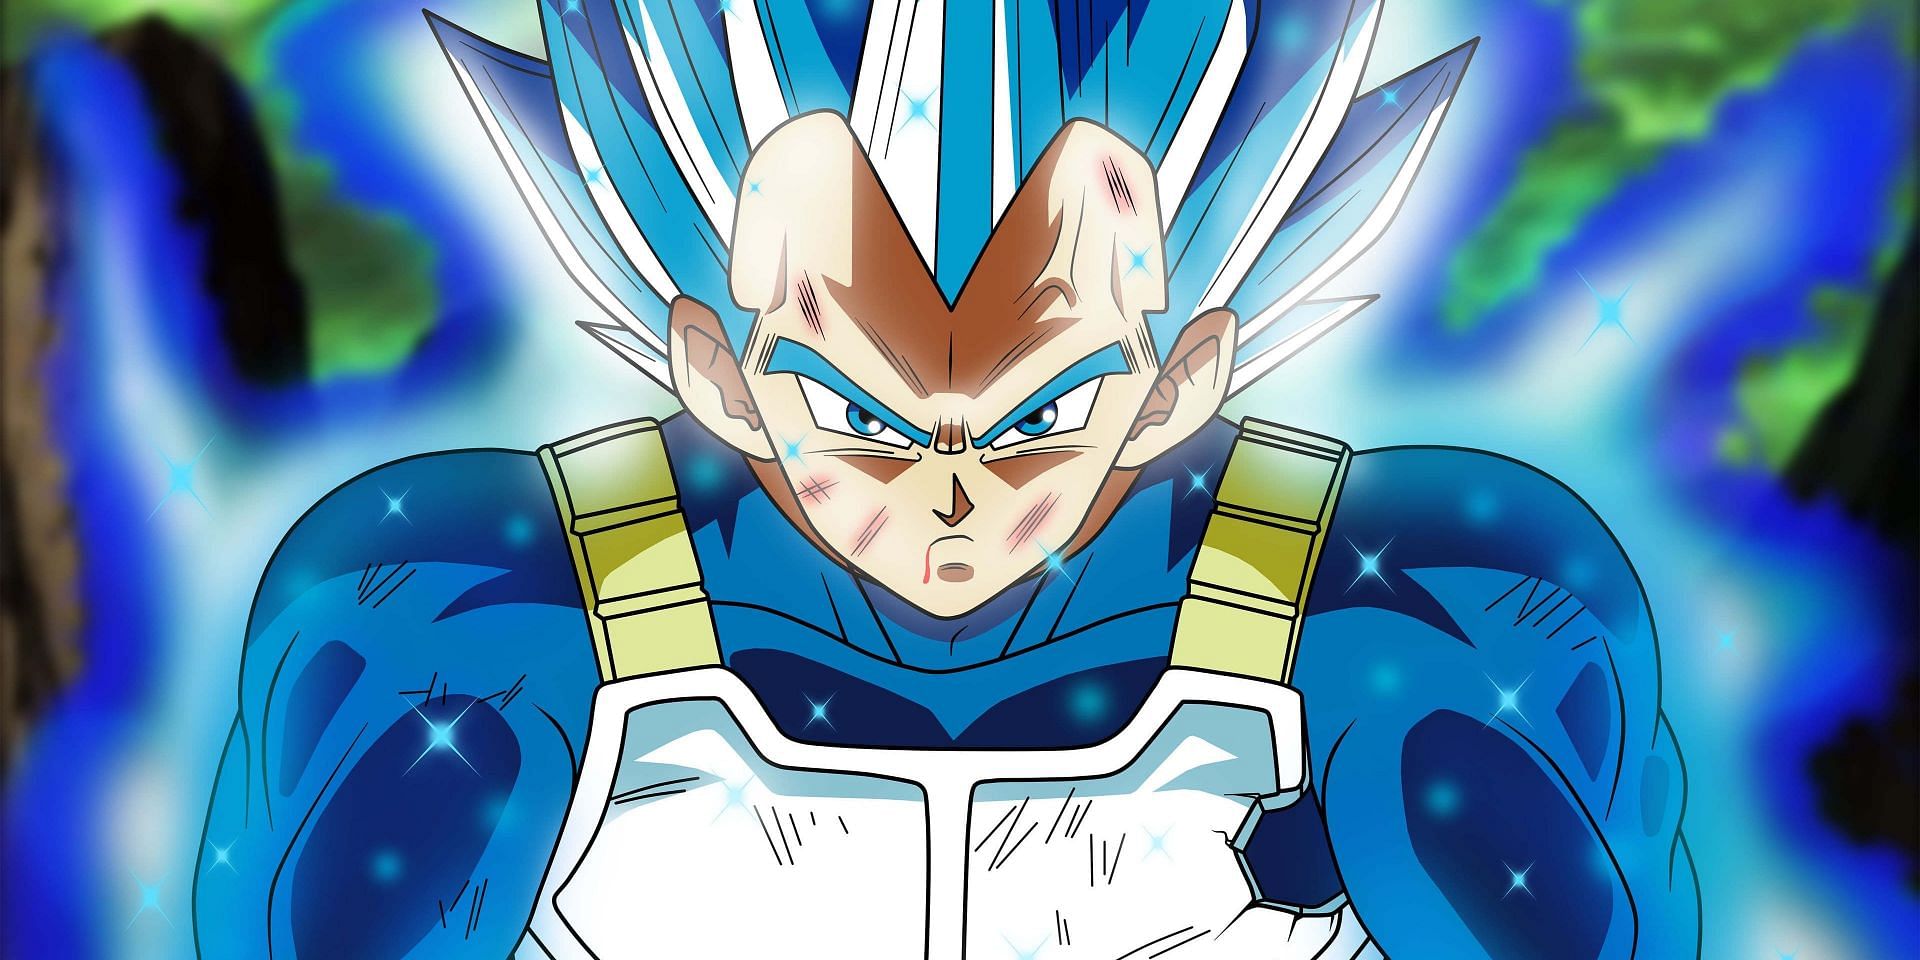 How come Vegeta is the only Saiyan that knows how to control his